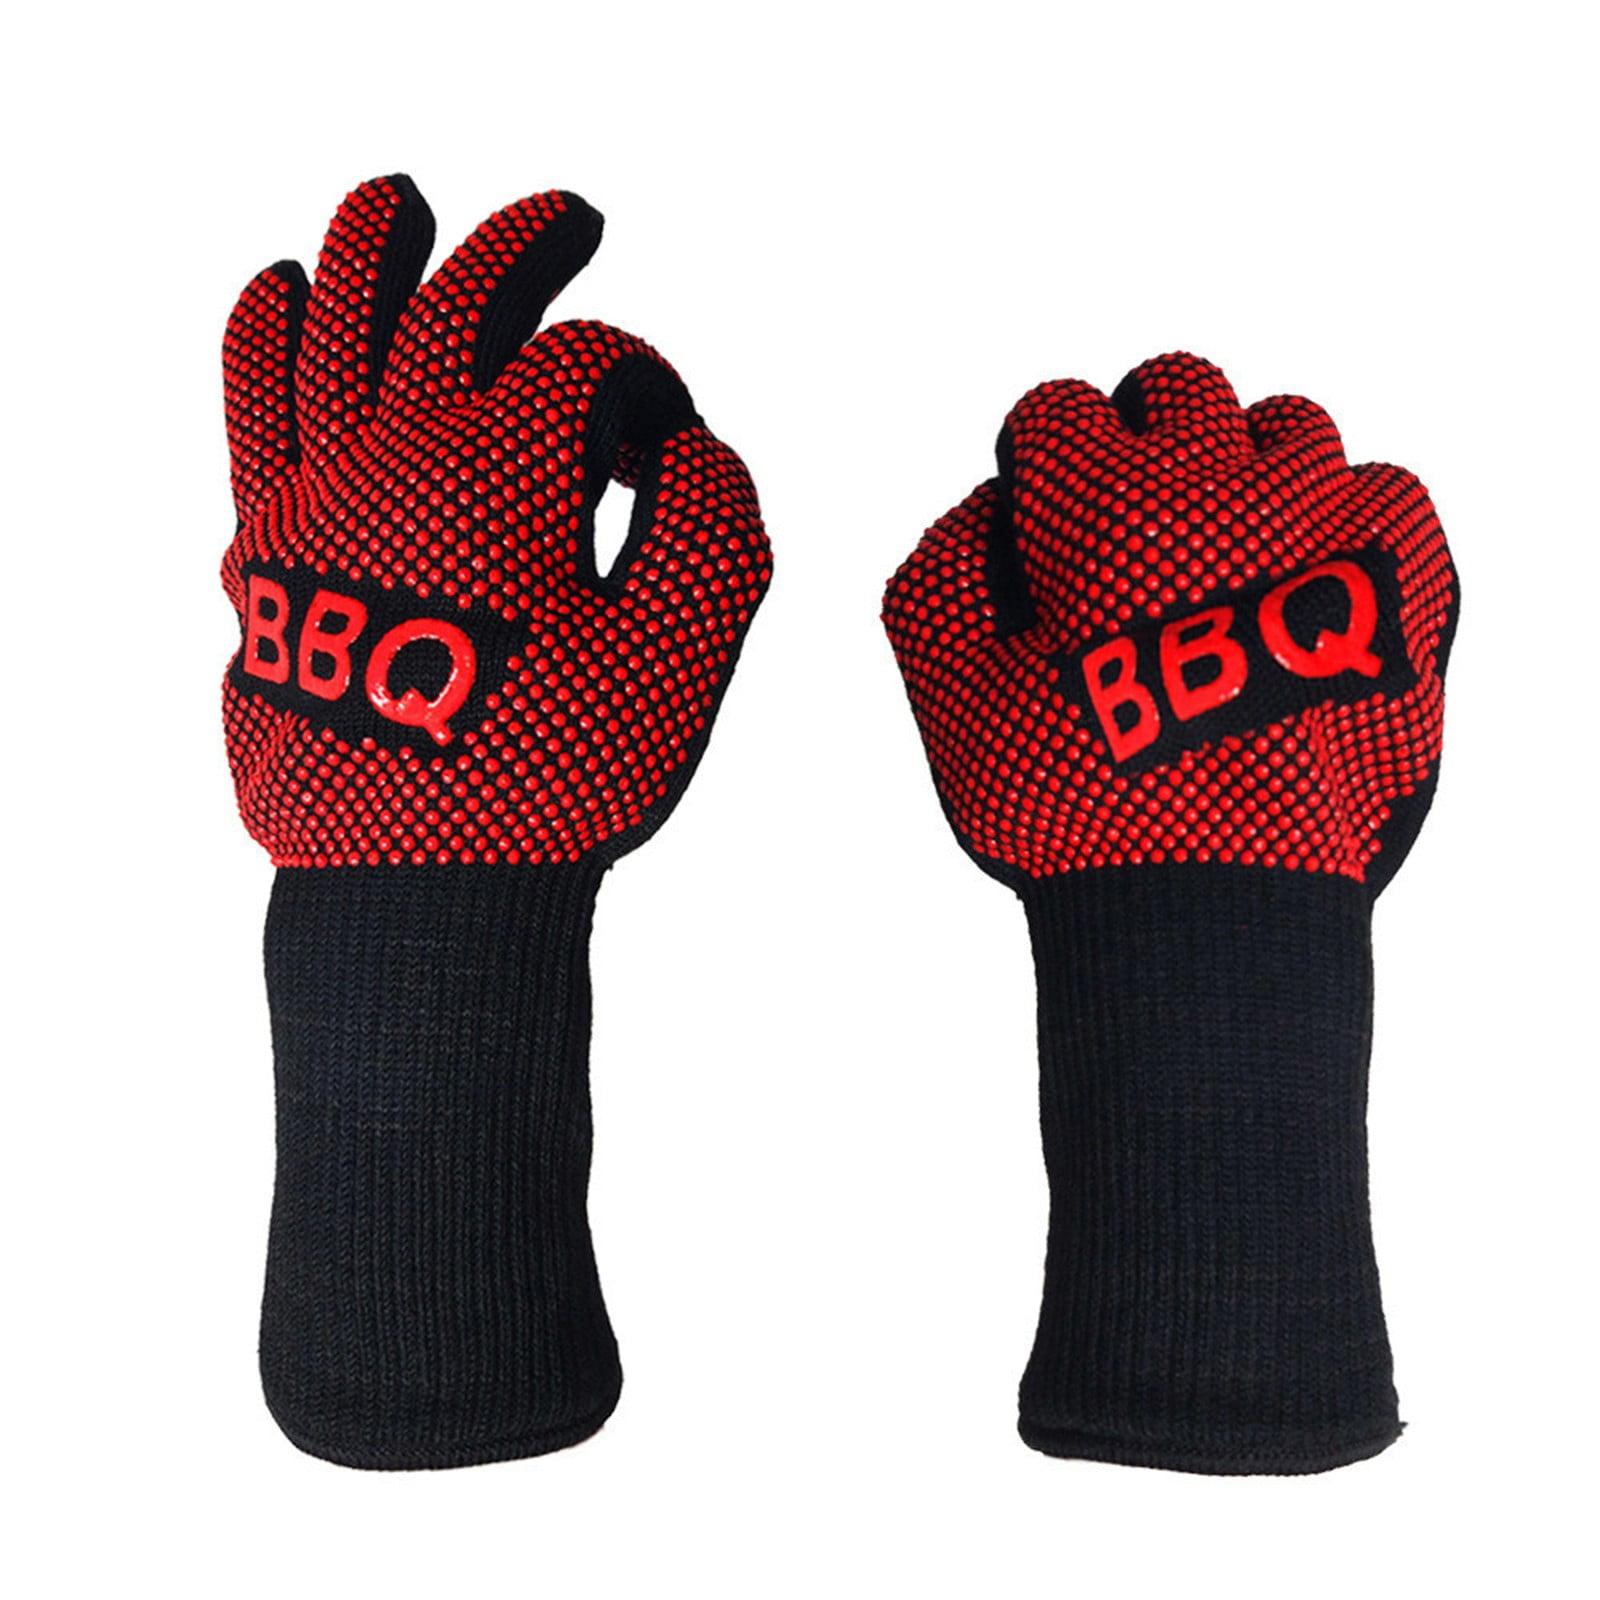 1pc Heat Resistant Oven Gloves - Cut Resistant, Non-Slip Silicone BBQ Gloves  for Kitchen, Grill, Camping, and Cookware